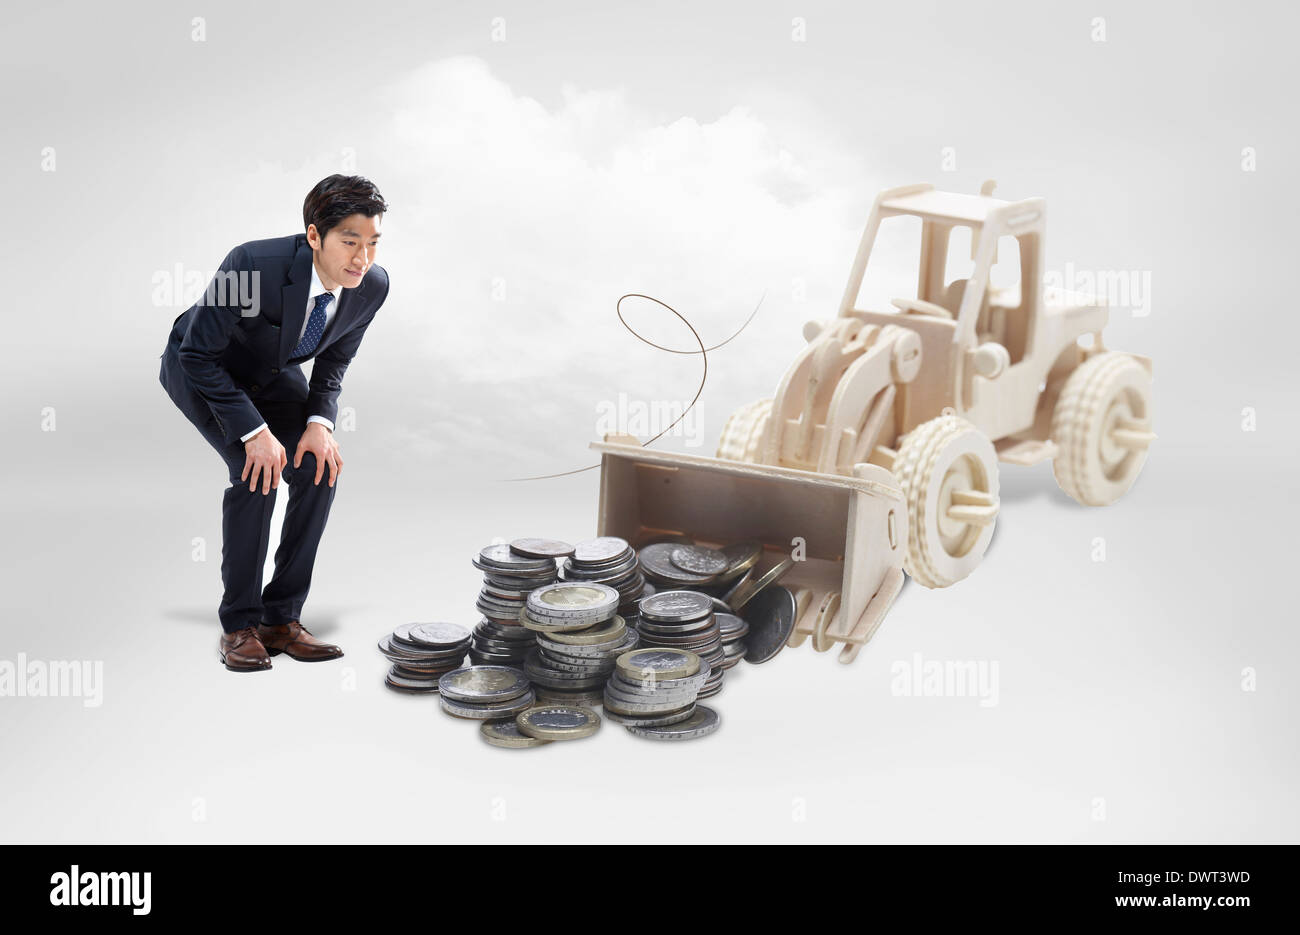 a business man looking at a pile of coins Stock Photo